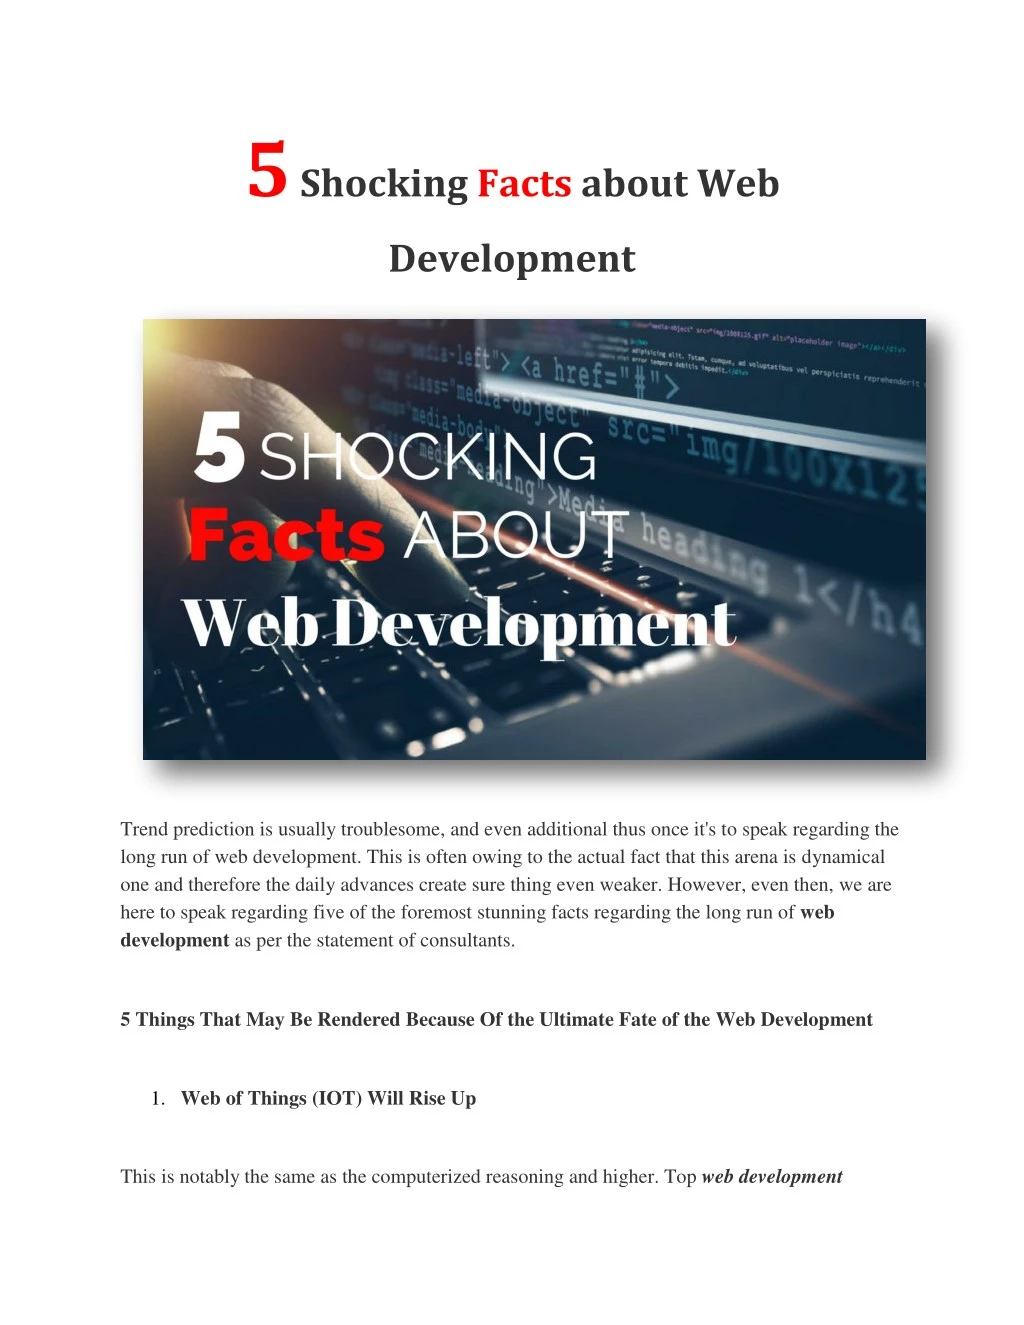 5 shocking facts about web development